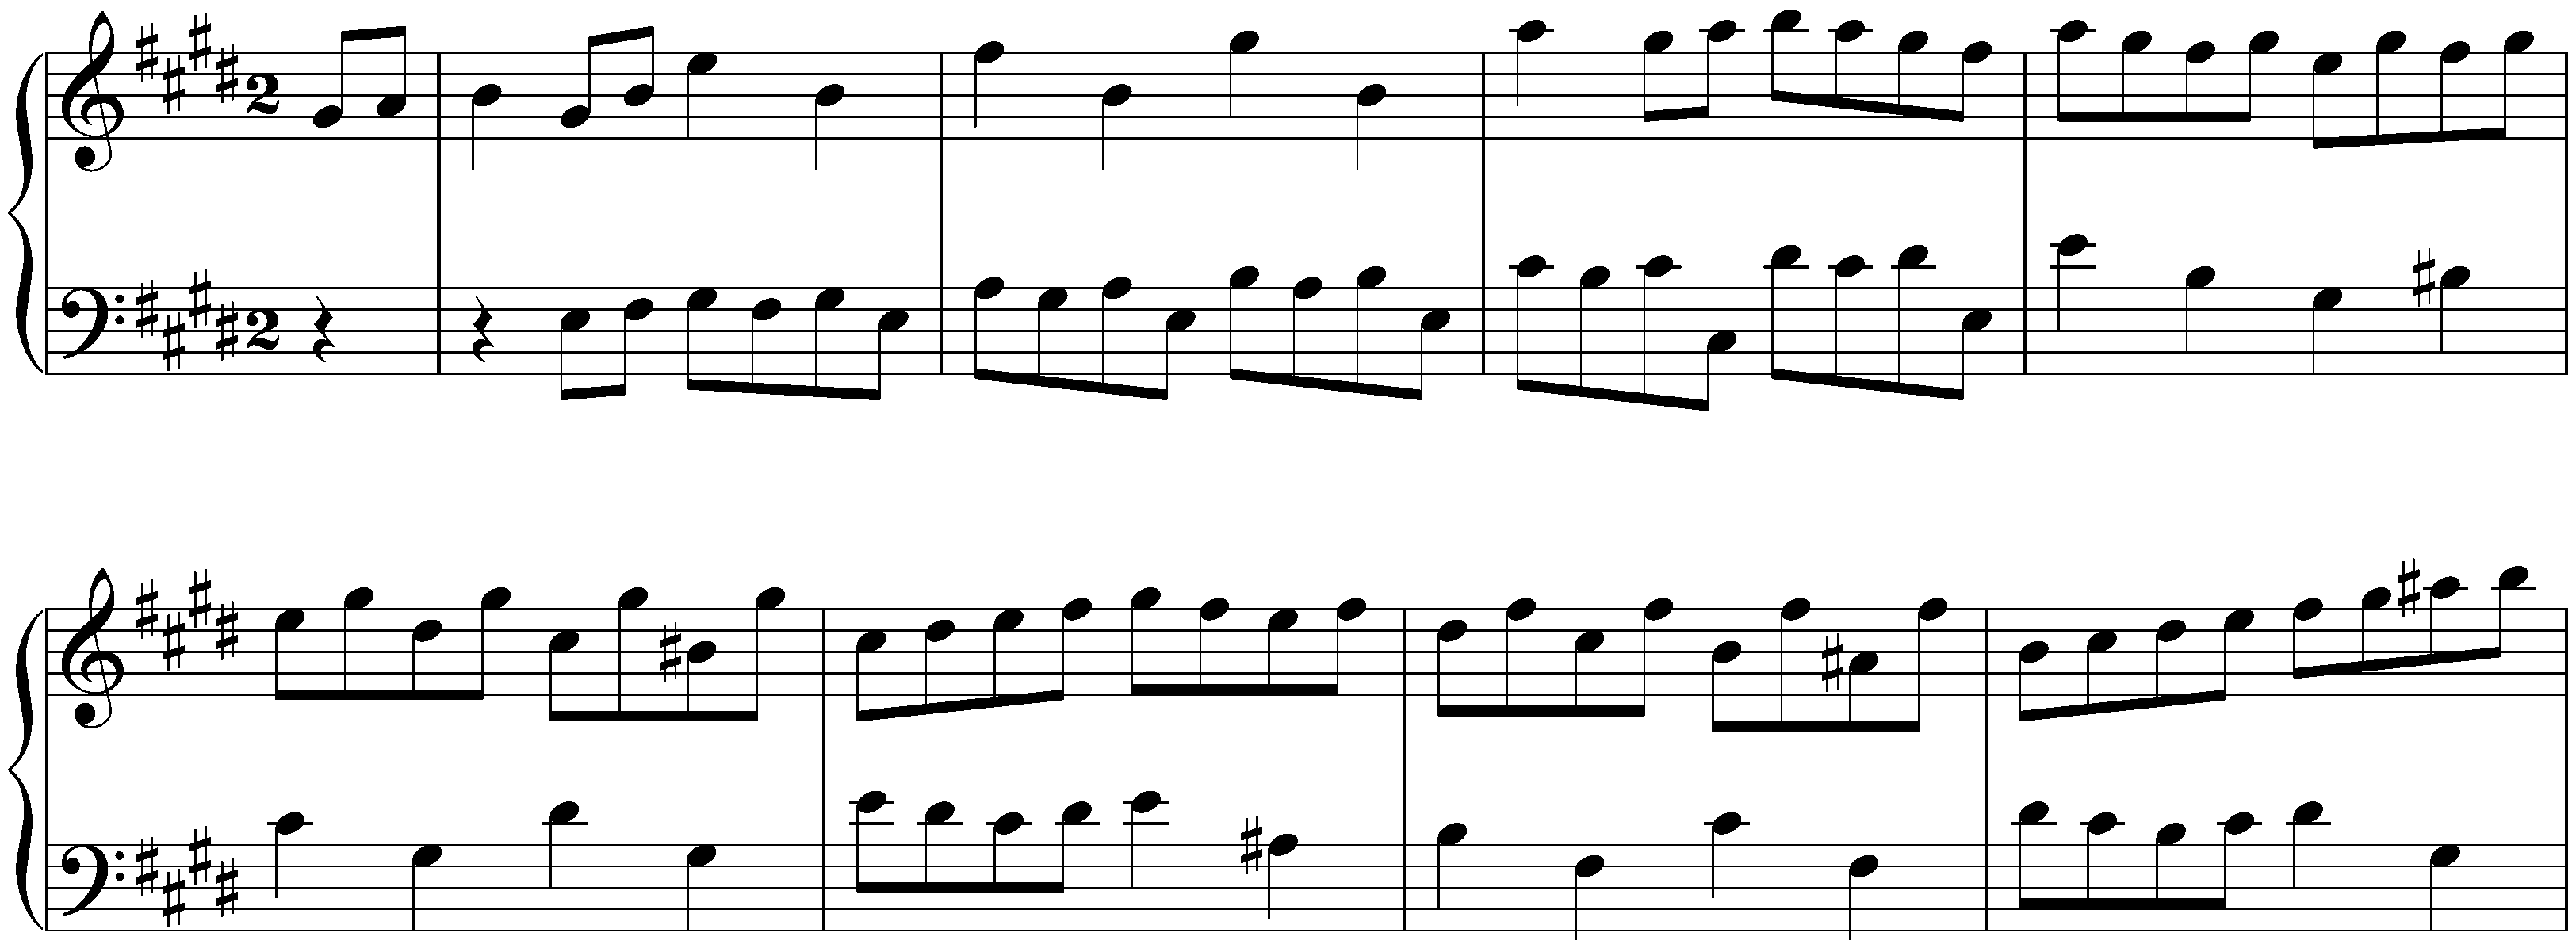 French Suite no. 6 in E major, BWV 817; 6. Bourrée